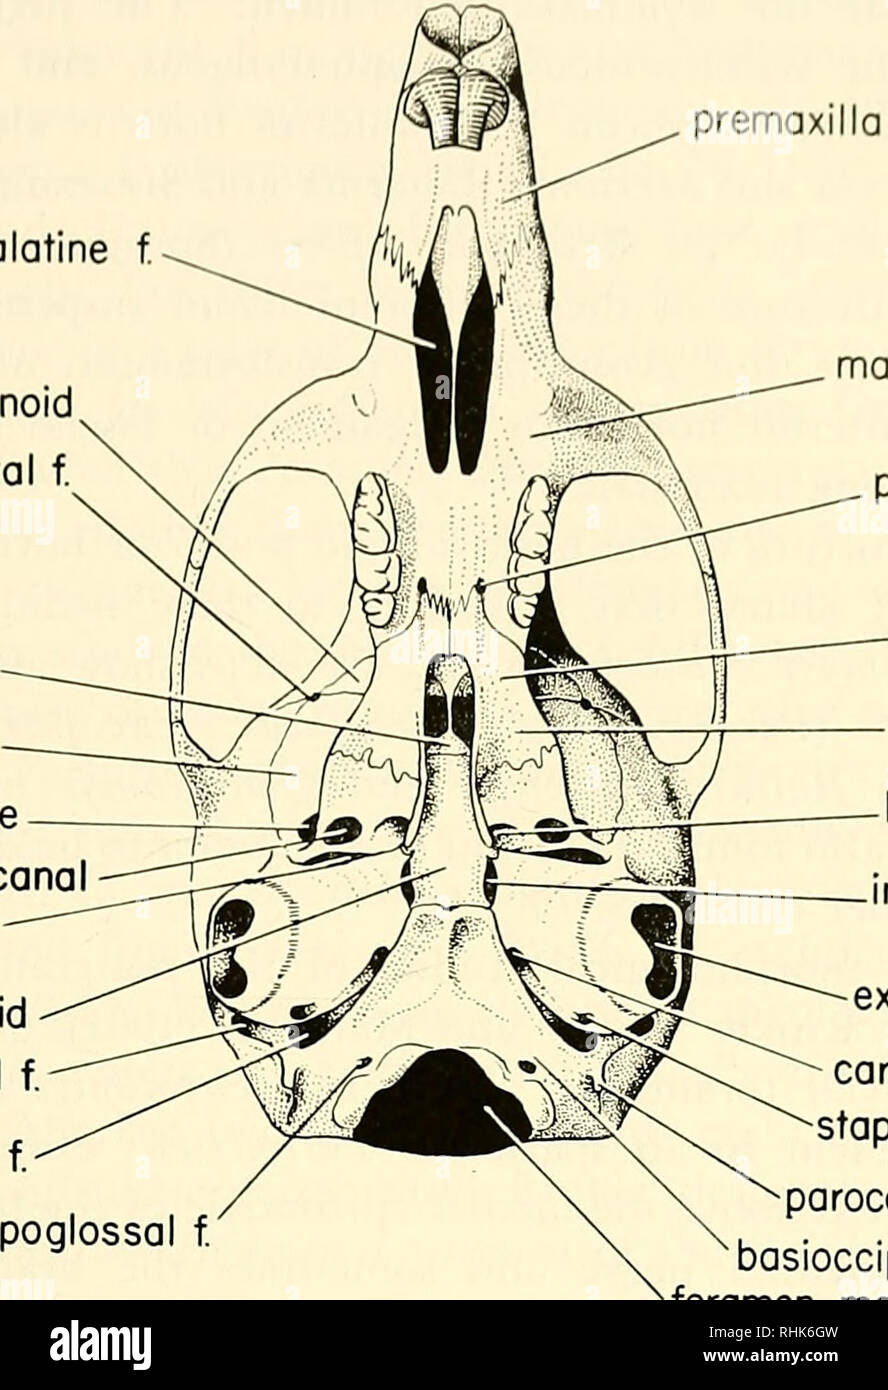 . Biology of Peromyscus (Rodentia). Mice; Peromyscus. /hidloiiiy 1.^1 premaxilla anter palatine f. orbitosphenoid sphenofrontal f. presphenoid allsphenoid foramen ovale allsphenoid ccno lacerate f basisphenoid stylomastoid f jugular f hypoglossal f. maxilla poster palatine f palatine pterygoid fossa basisphenoid con. int. aud. meatus ext. aud. meatus carotid canal stapedial f paroccipital process basioccipital foramen magnum Fio. 2. Ventral view of skull of Peromyscus inaniculatus. Mono County, Cali- fornia. The hyoid skeleton and its associated musculature vary signif- icantly in muroids (Spr Stock Photo